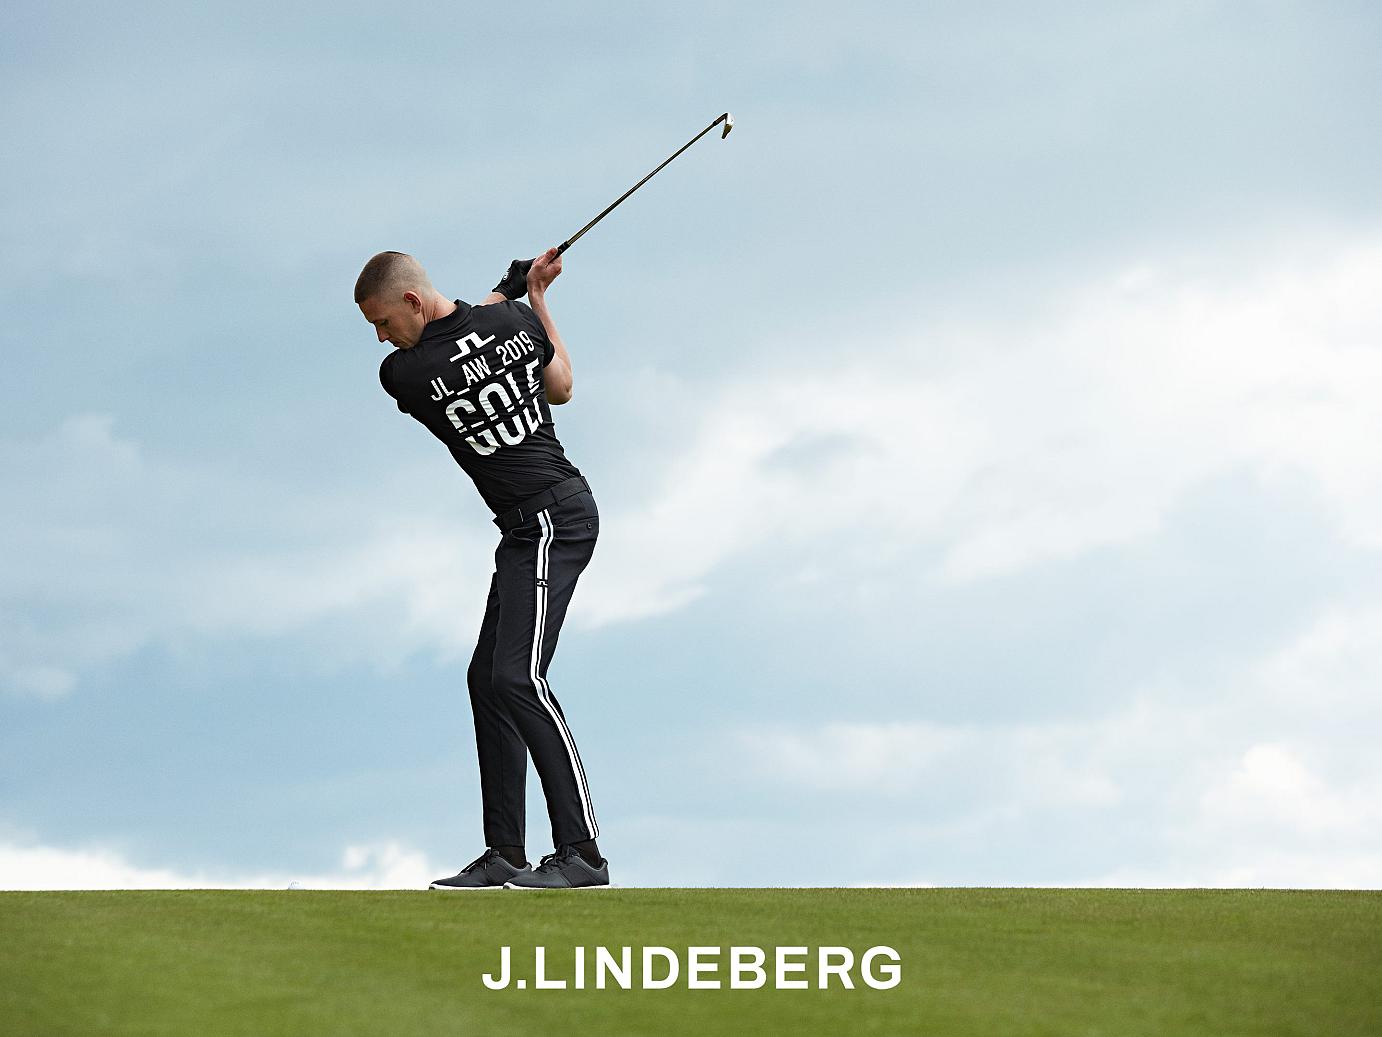 CoqCreative power by ProductionLink s.r.l. J-Lindeberg-Golf J-Lindeberg-Golf  J-Lindeberg-Golf